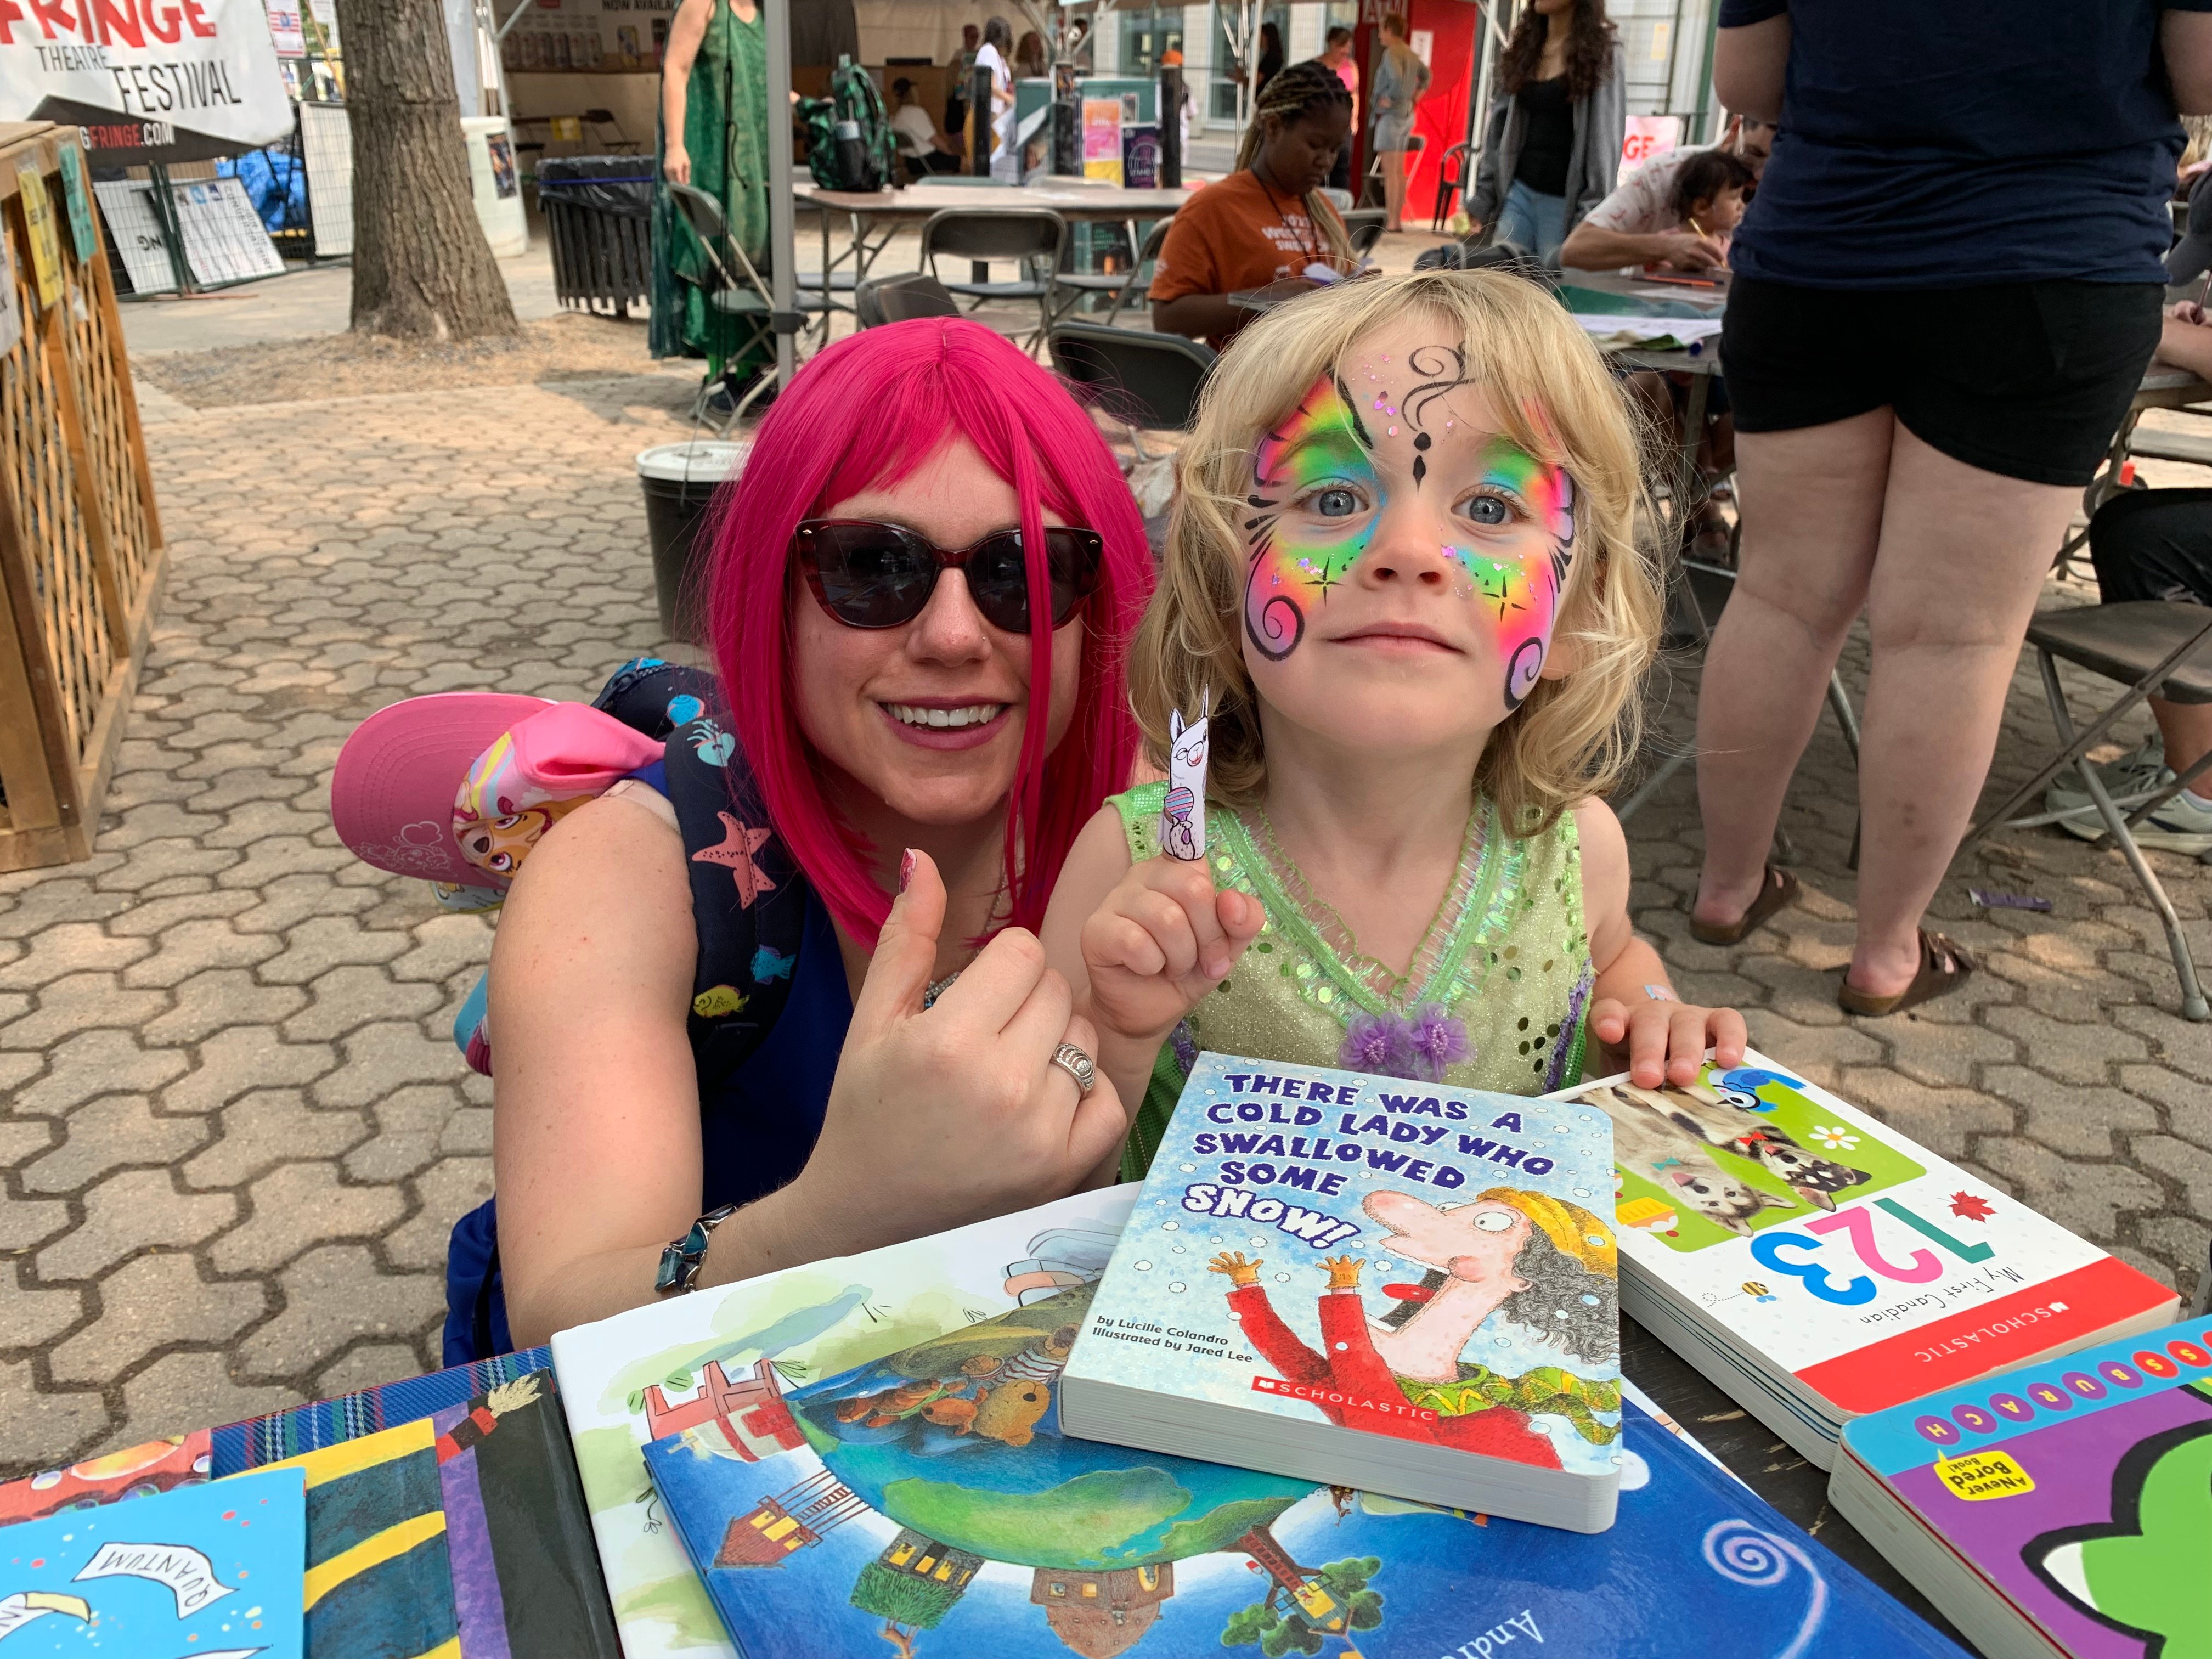 A kid and a lady with a pink wig in front of books